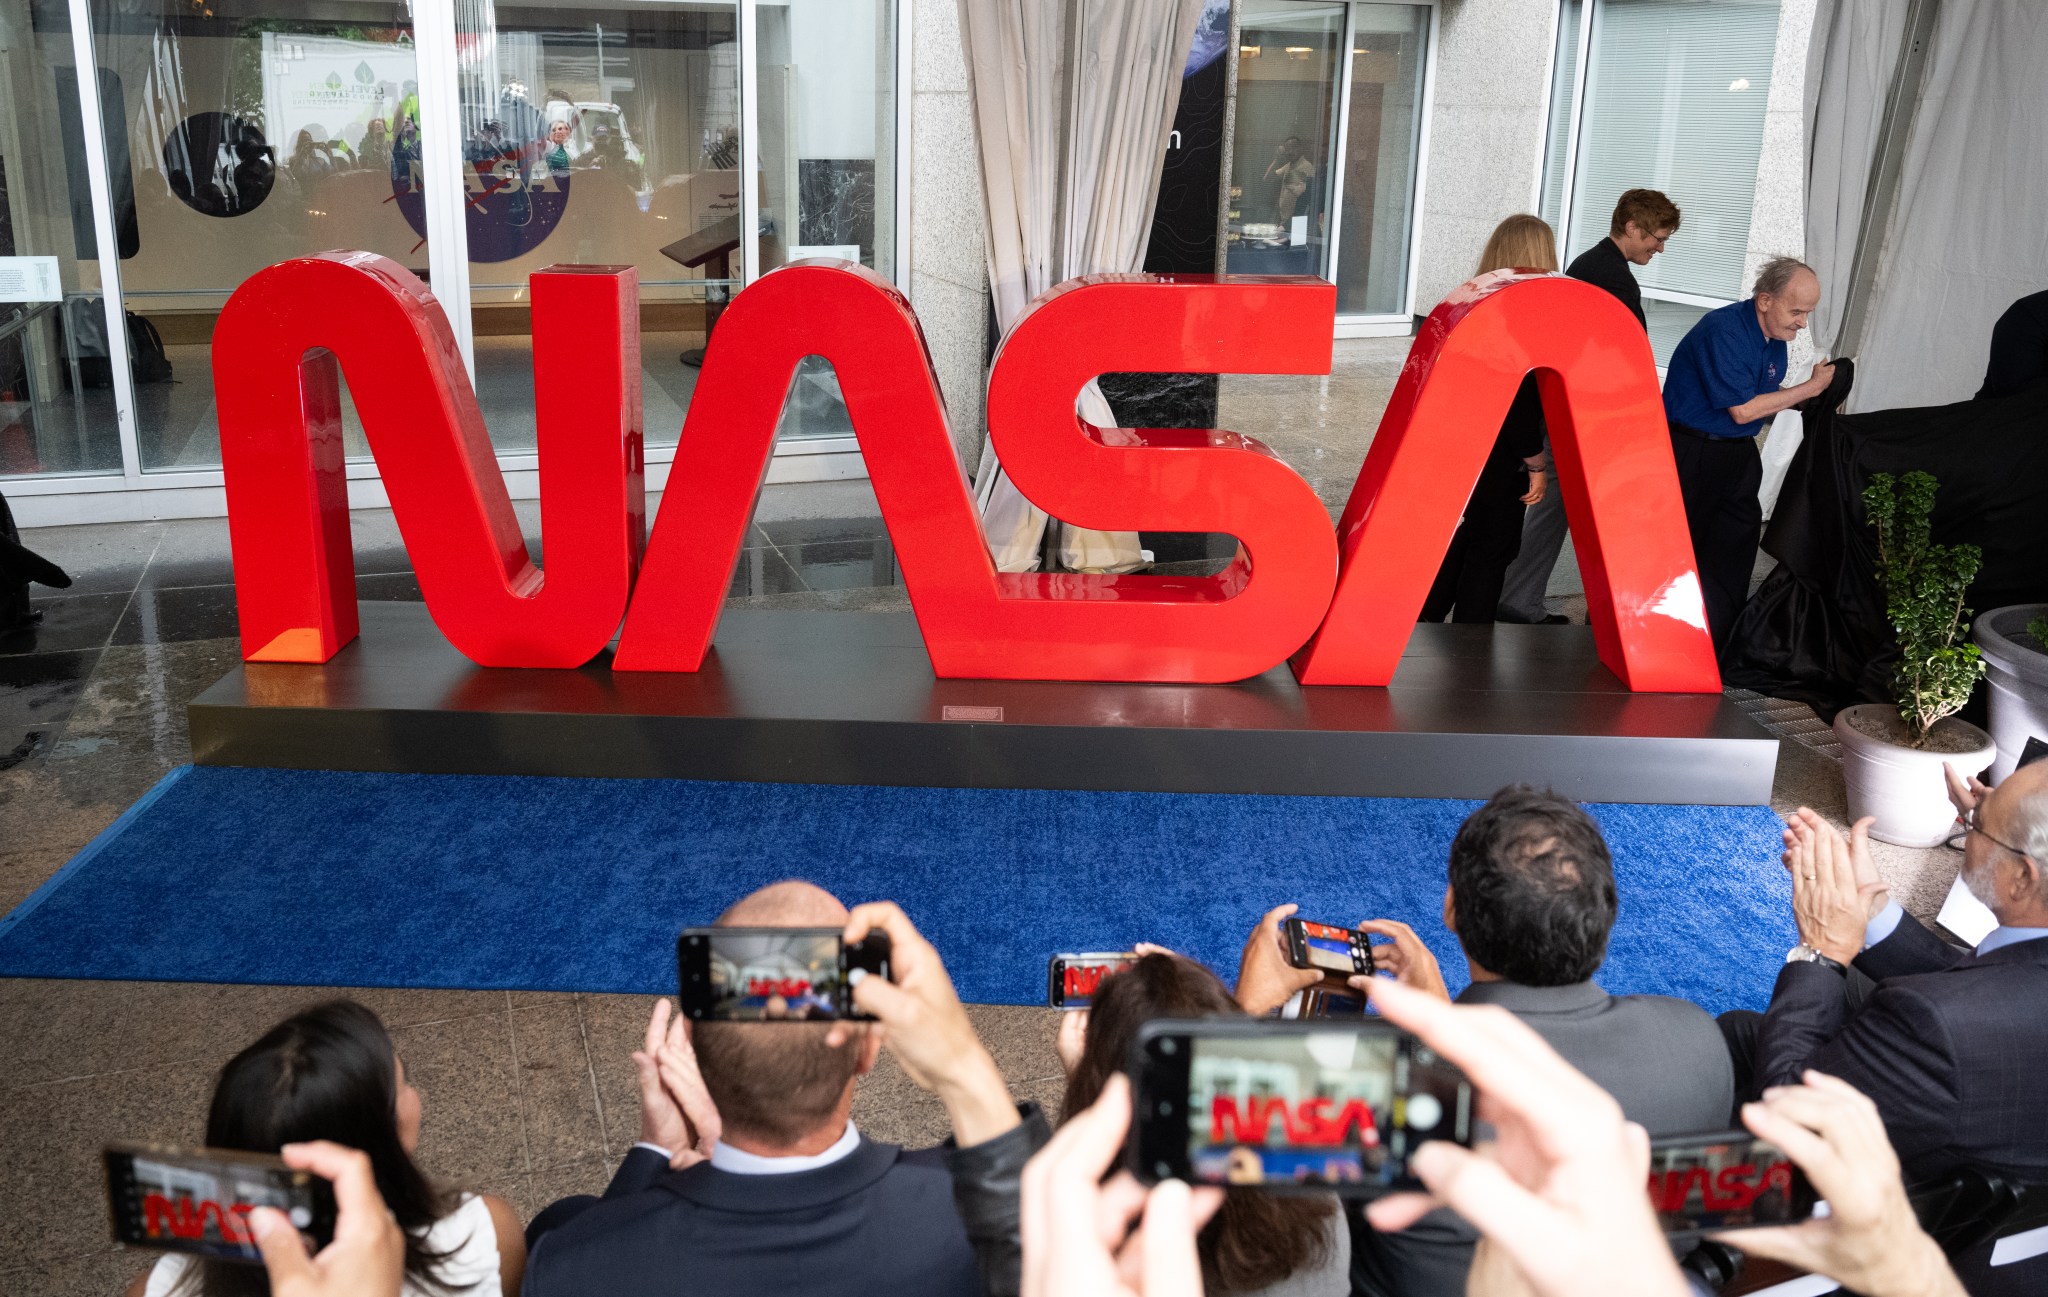 A red sign reading "NASA" in the "worm" logotype created in the 1970s stands before a crowd of people clapping and taking pictures. The red three-dimensional letters rest on a black platform, which is on a blue carpet in front of the Earth Information Center at NASA Headquarters in Washington.